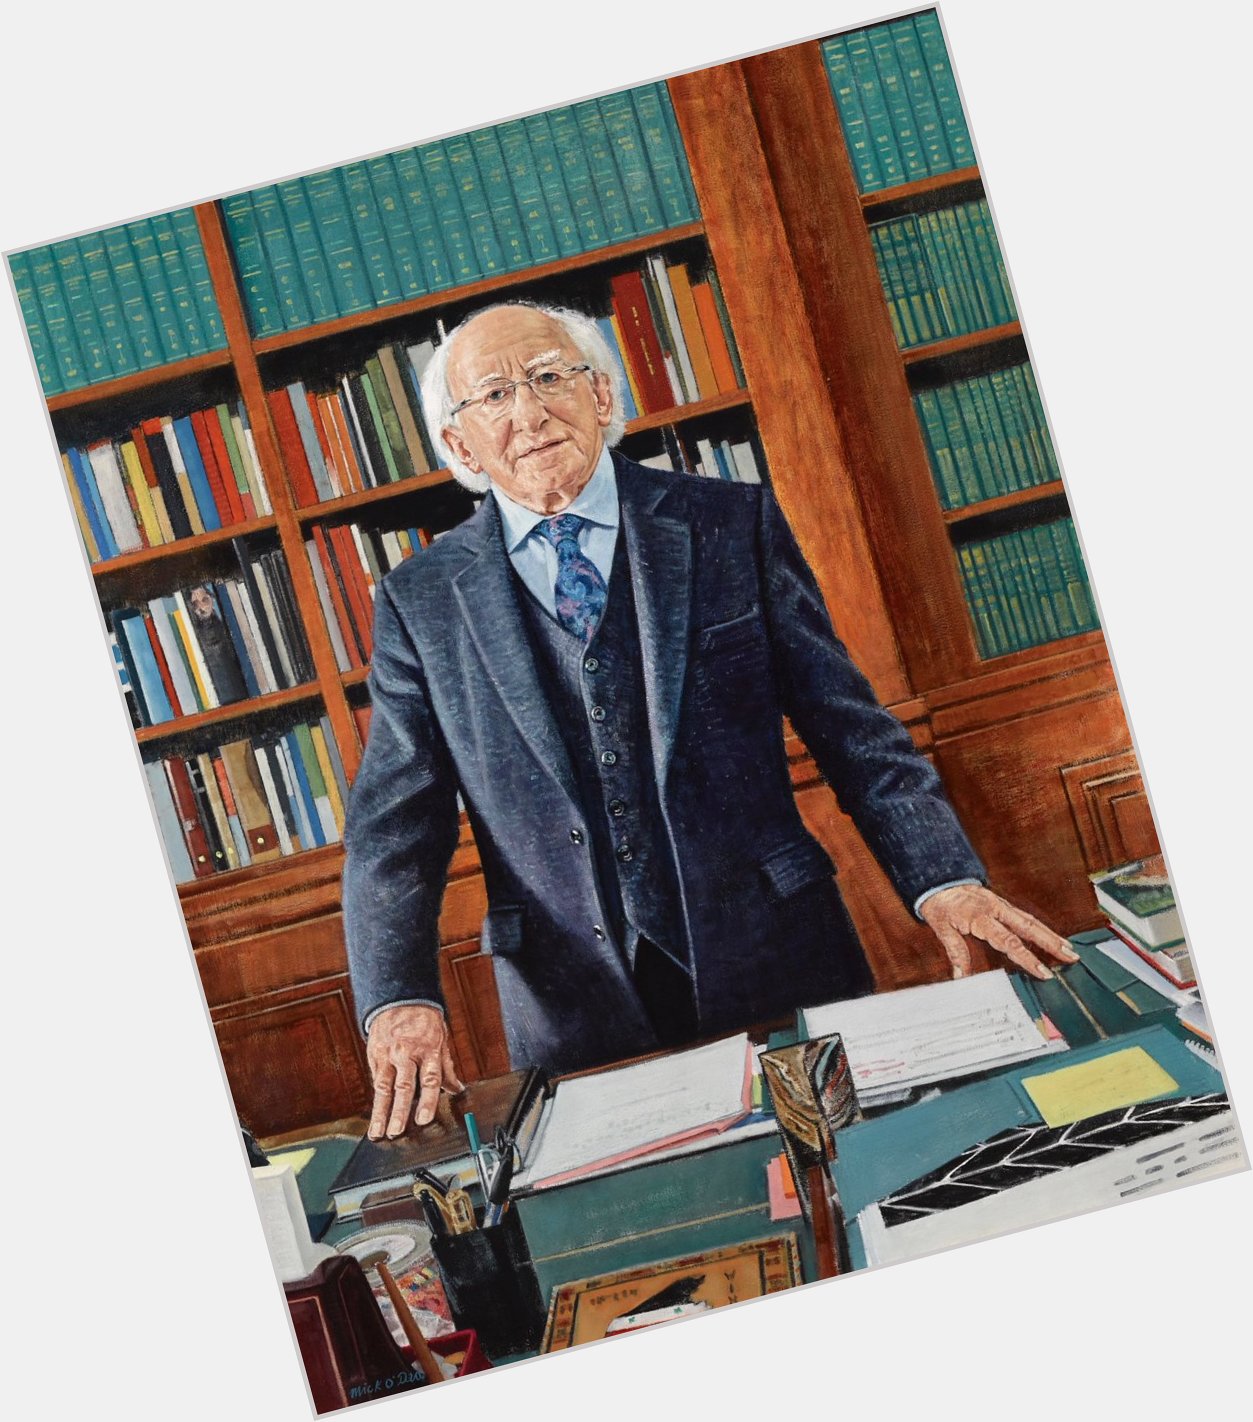 Happy Birthday to President Michael D Higgins who continue to show leadership and inspire. 